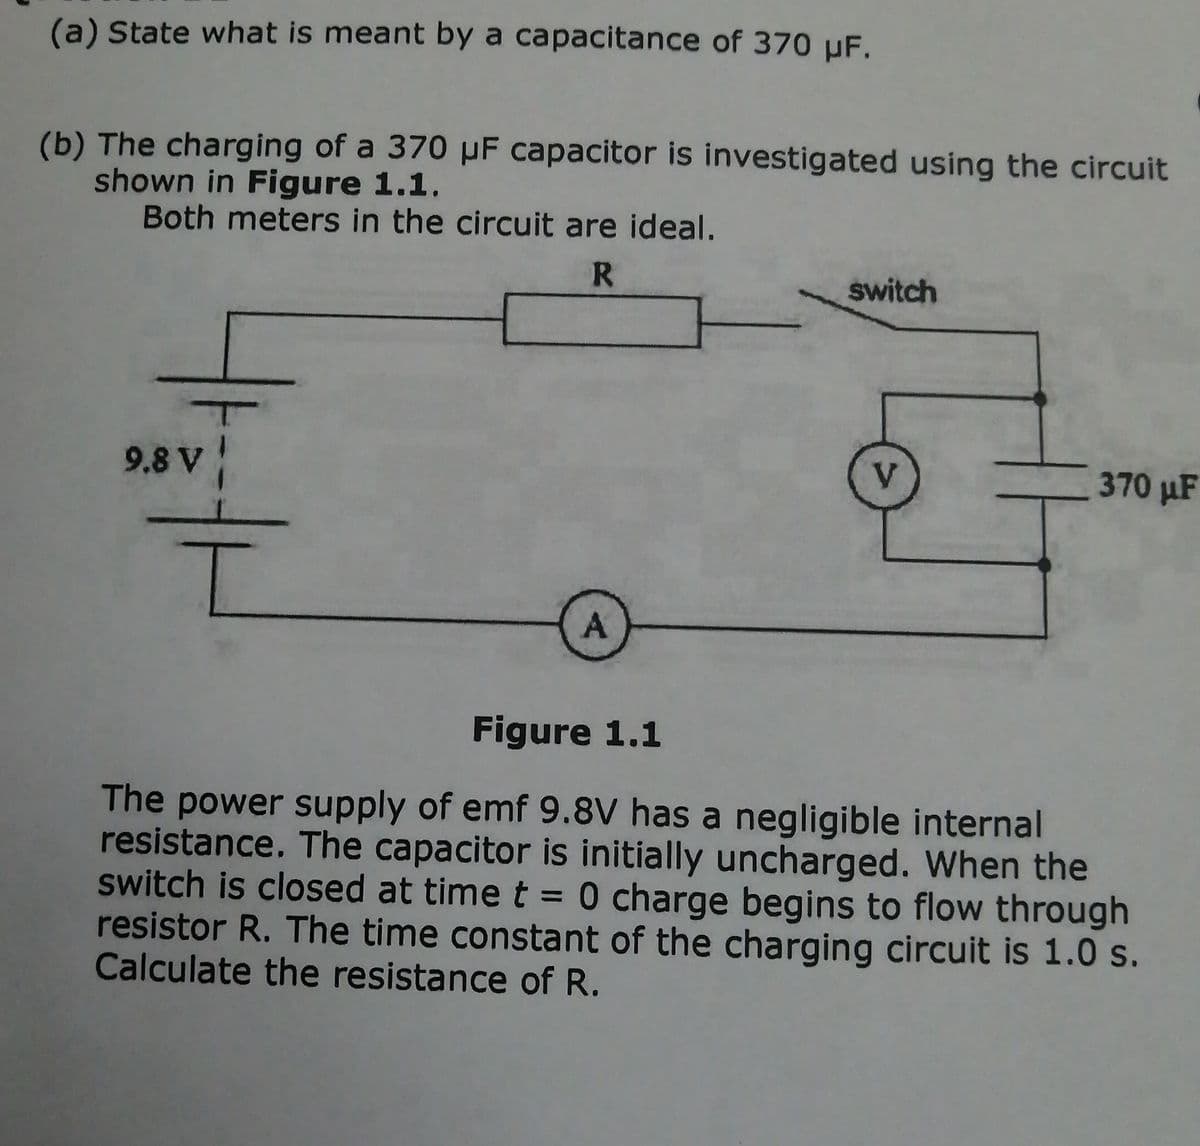 (a) State what is meant by a capacitance of 370 µF.
(b) The charging of a 370 µF capacitor is investigated using the circuit
shown in Figure 1.1.
Both meters in the circuit are ideal.
switch
9.8 V
V.
370 µF
Figure 1.1
The power supply of emf 9.8V has a negligible internal
resistance. The capacitor is initially uncharged. When the
switch is closed at time t = 0 charge begins to flow through
resistor R. The time constant of the charging circuit is 1.0 s.
Calculate the resistance of R.
